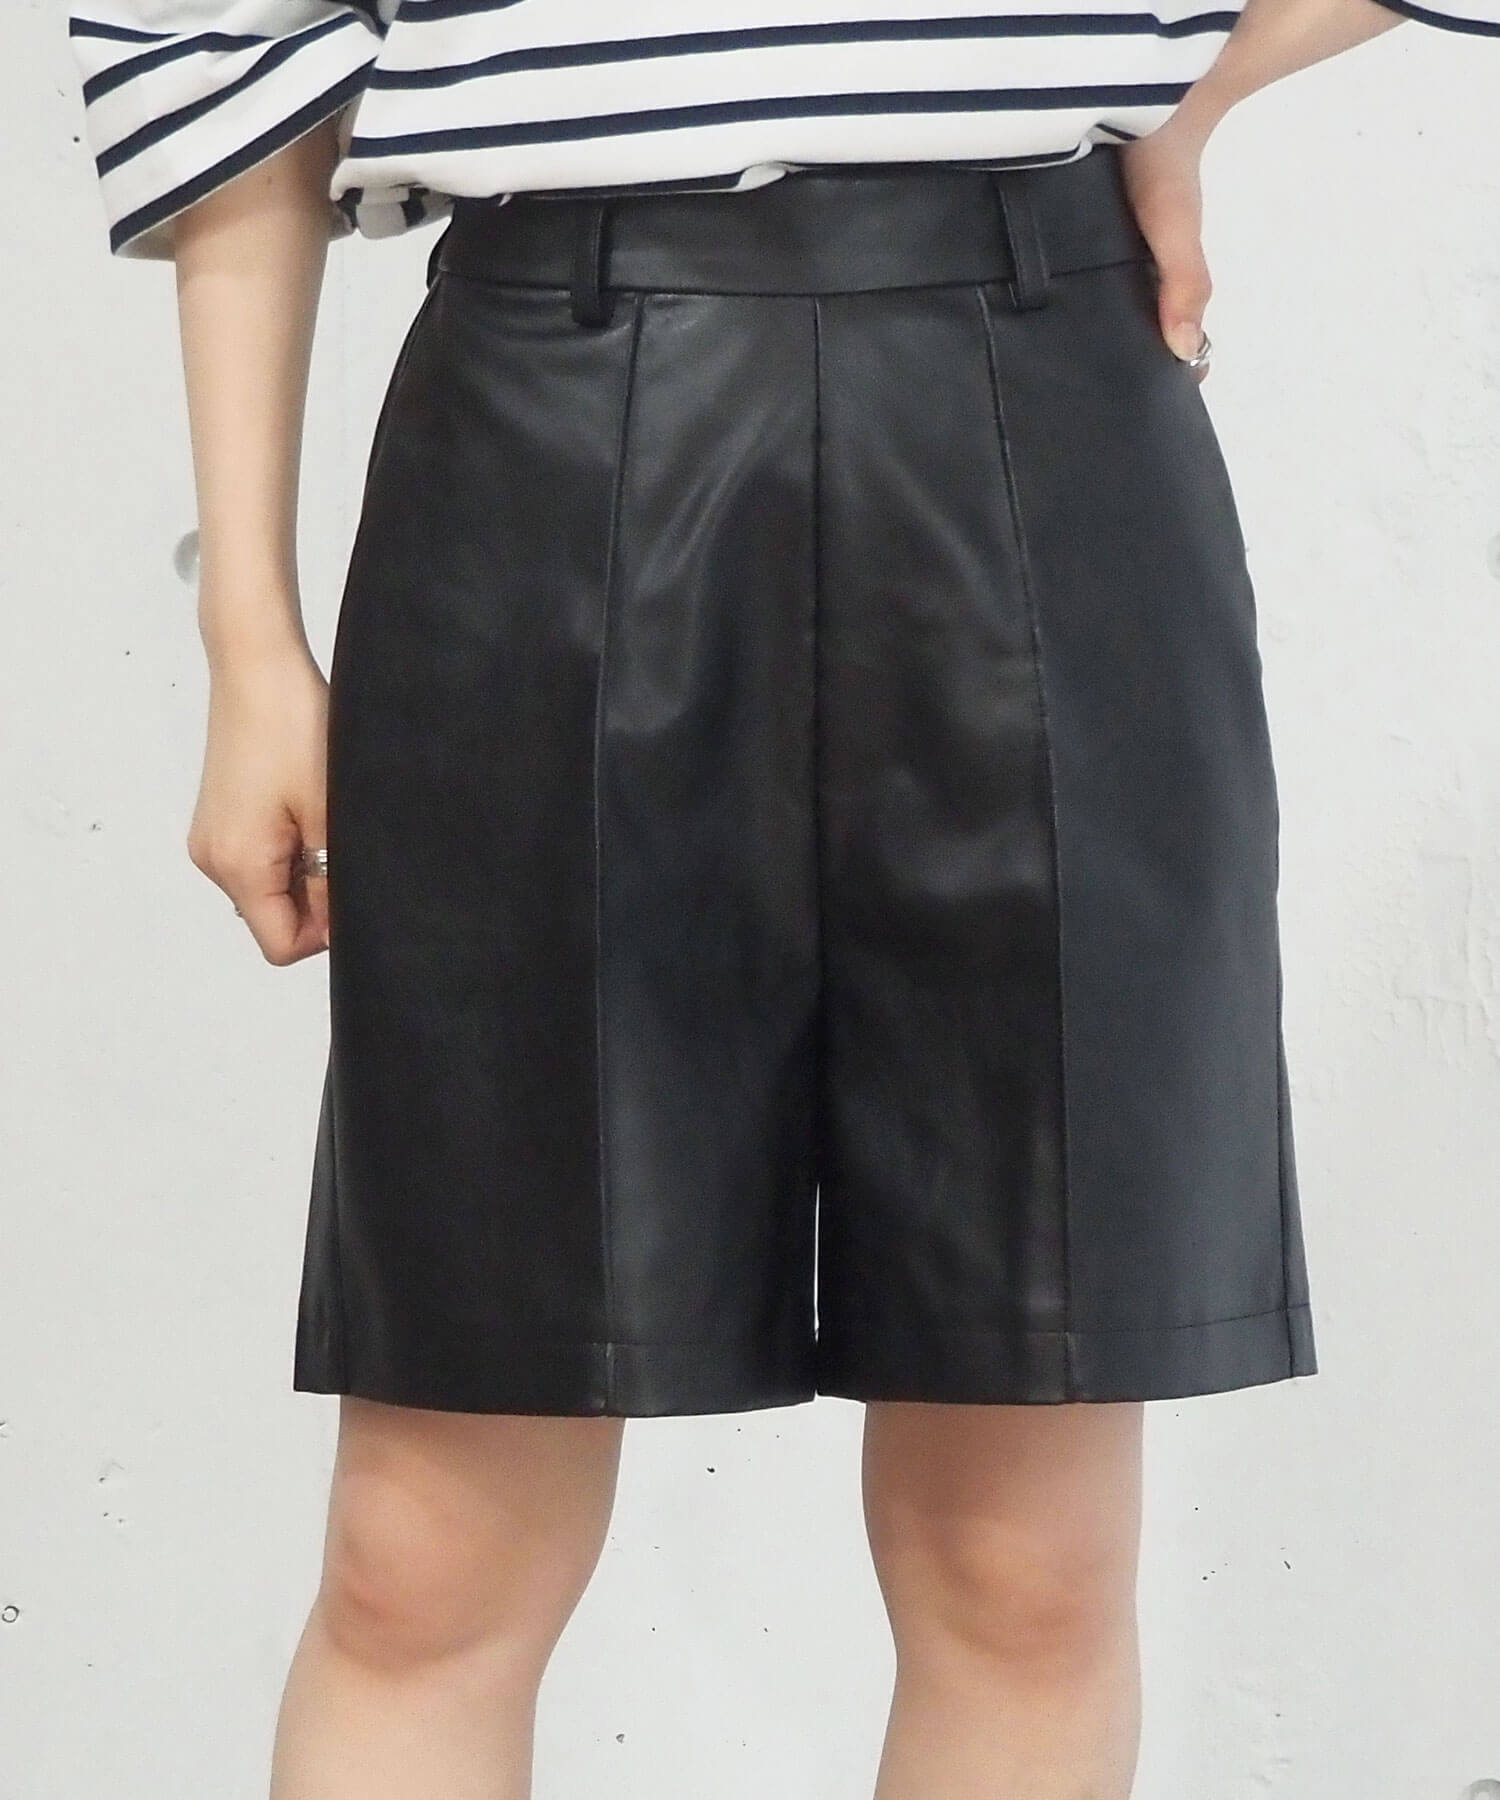 【e／s】 FAUX LEATHER SHORT セットアップ